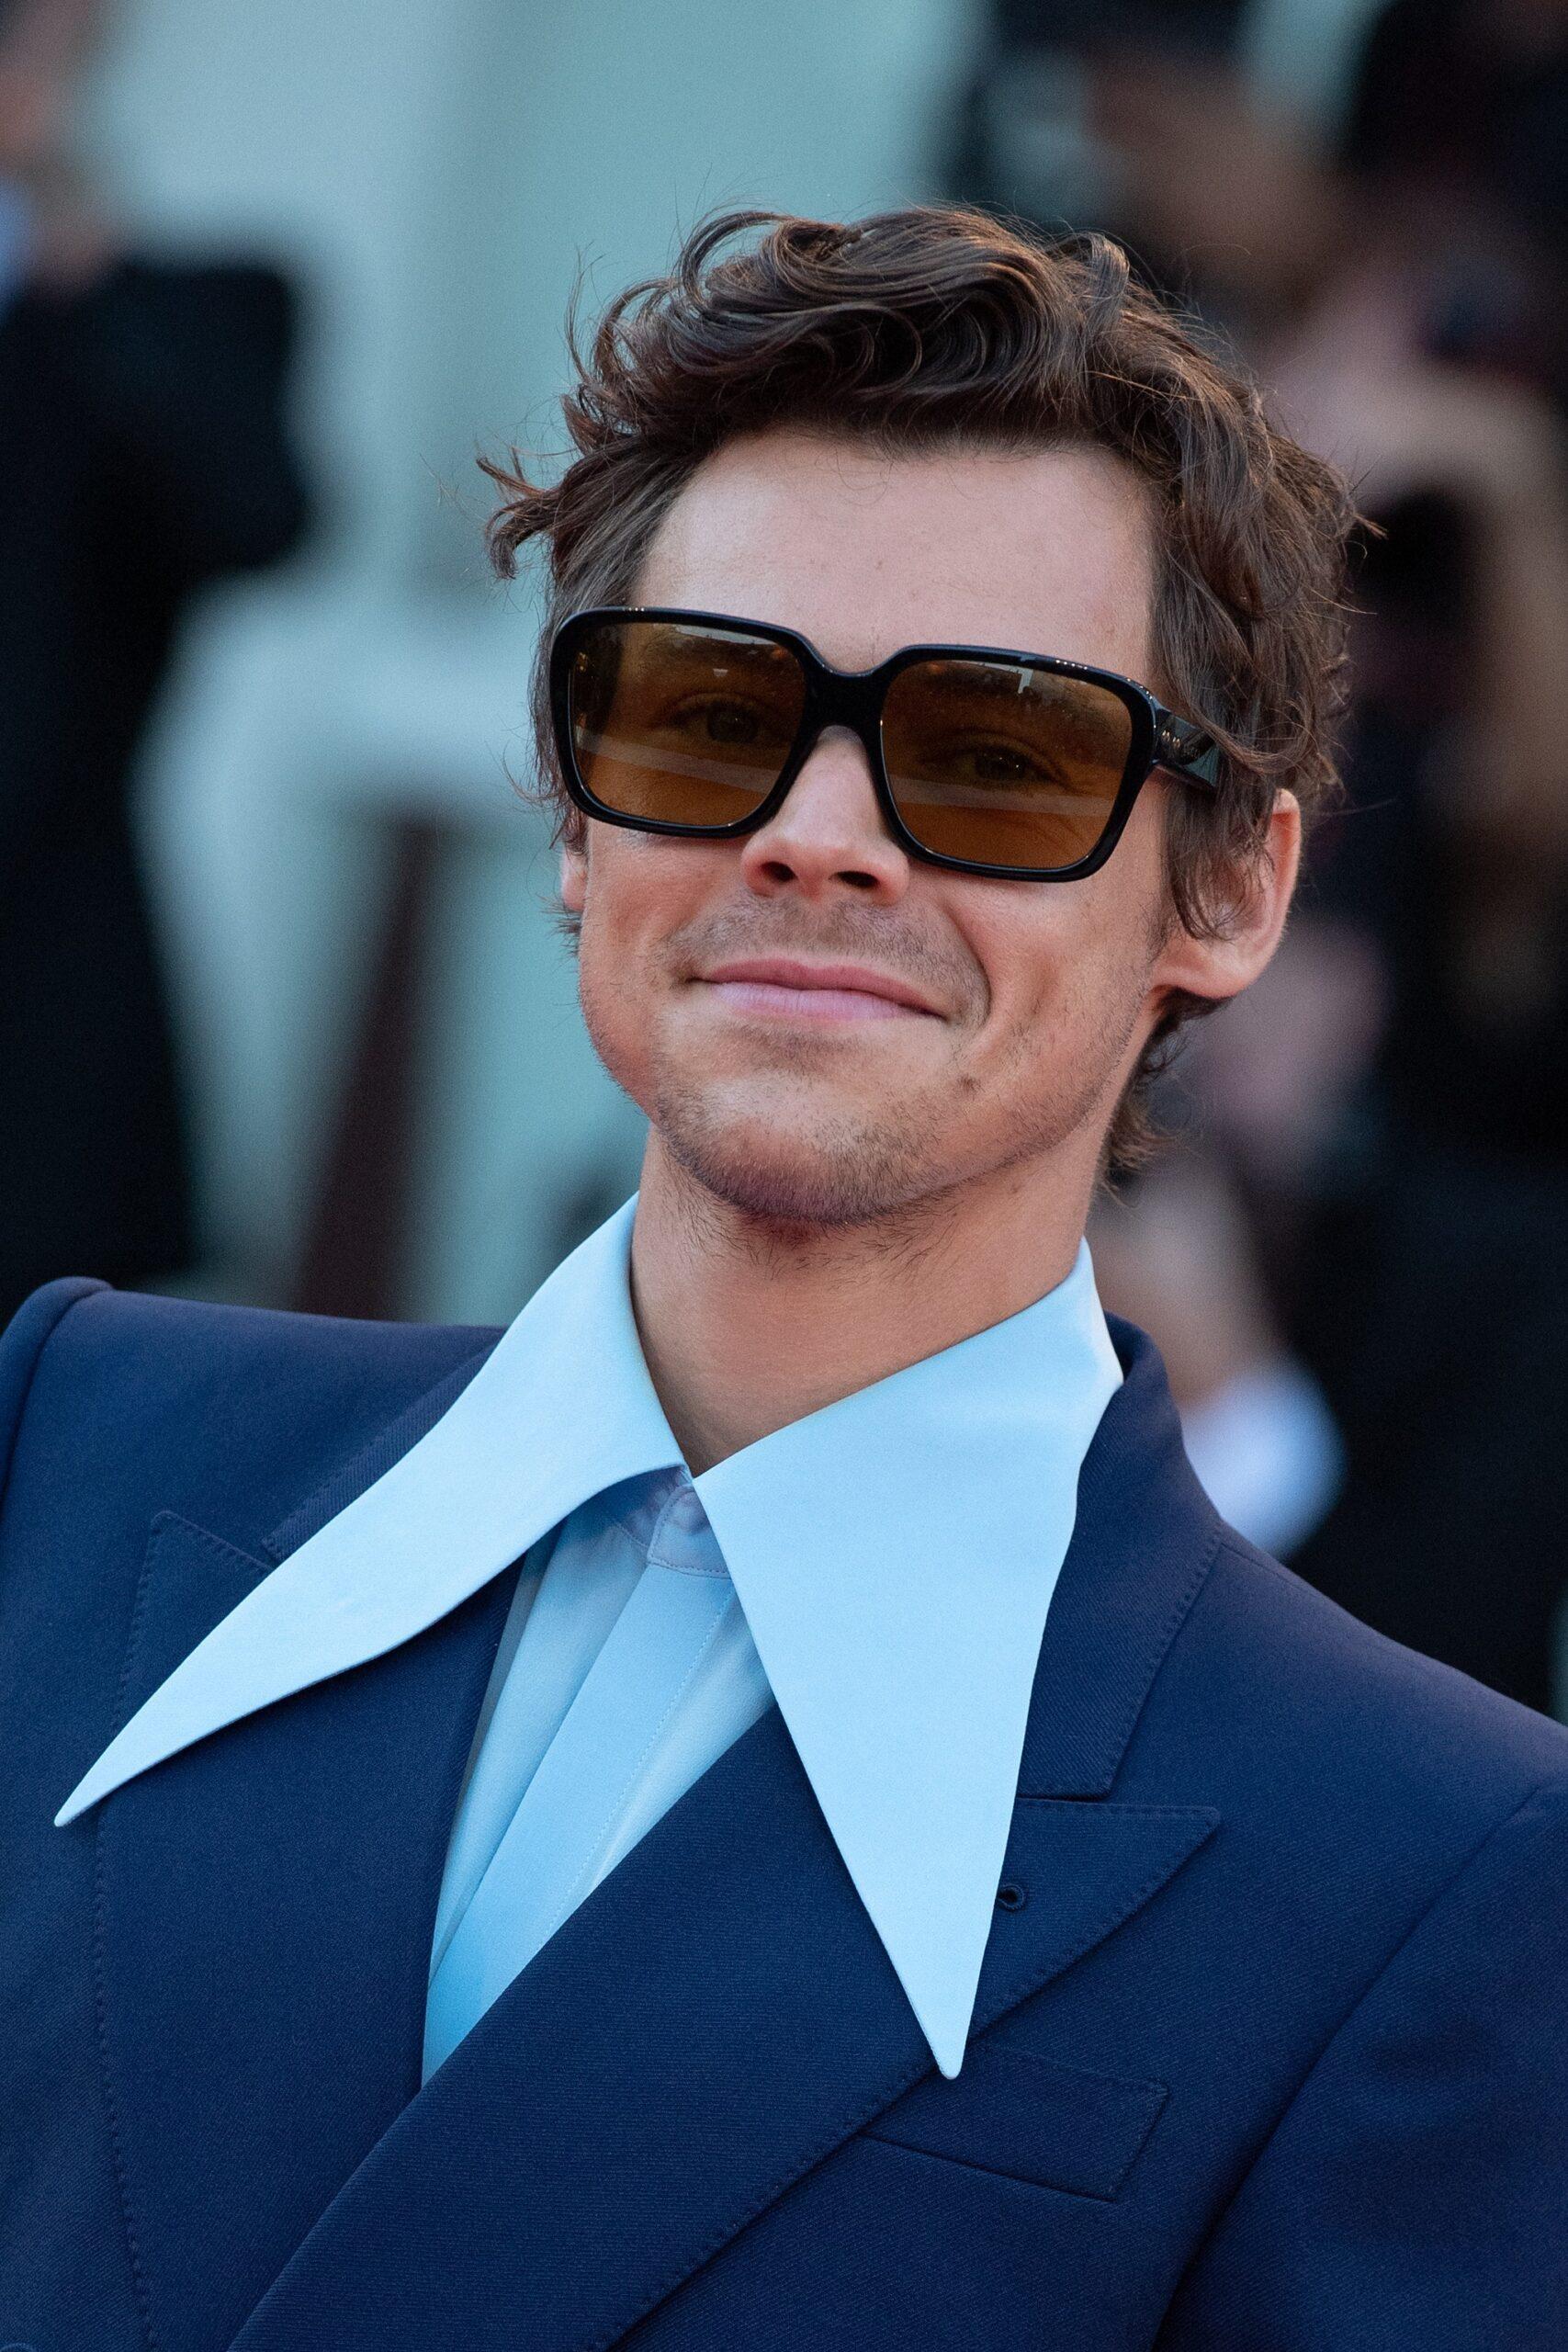 Harry Styles attends the "Don't Worry Darling" red carpet at the 79th Venice International Film Festival on September 05, 2022 in Venice, Italy. Photo: Pablo Cotello/imageSPACE. 05 Sep 2022 Pictured: Harry Styles. Photo credit: Paolo Cotello/imageSPACE / MEGA TheMegaAgency.com +1 888 505 6342 (Mega Agency TagID: MEGA892334_001.jpg) [Photo via Mega Agency]